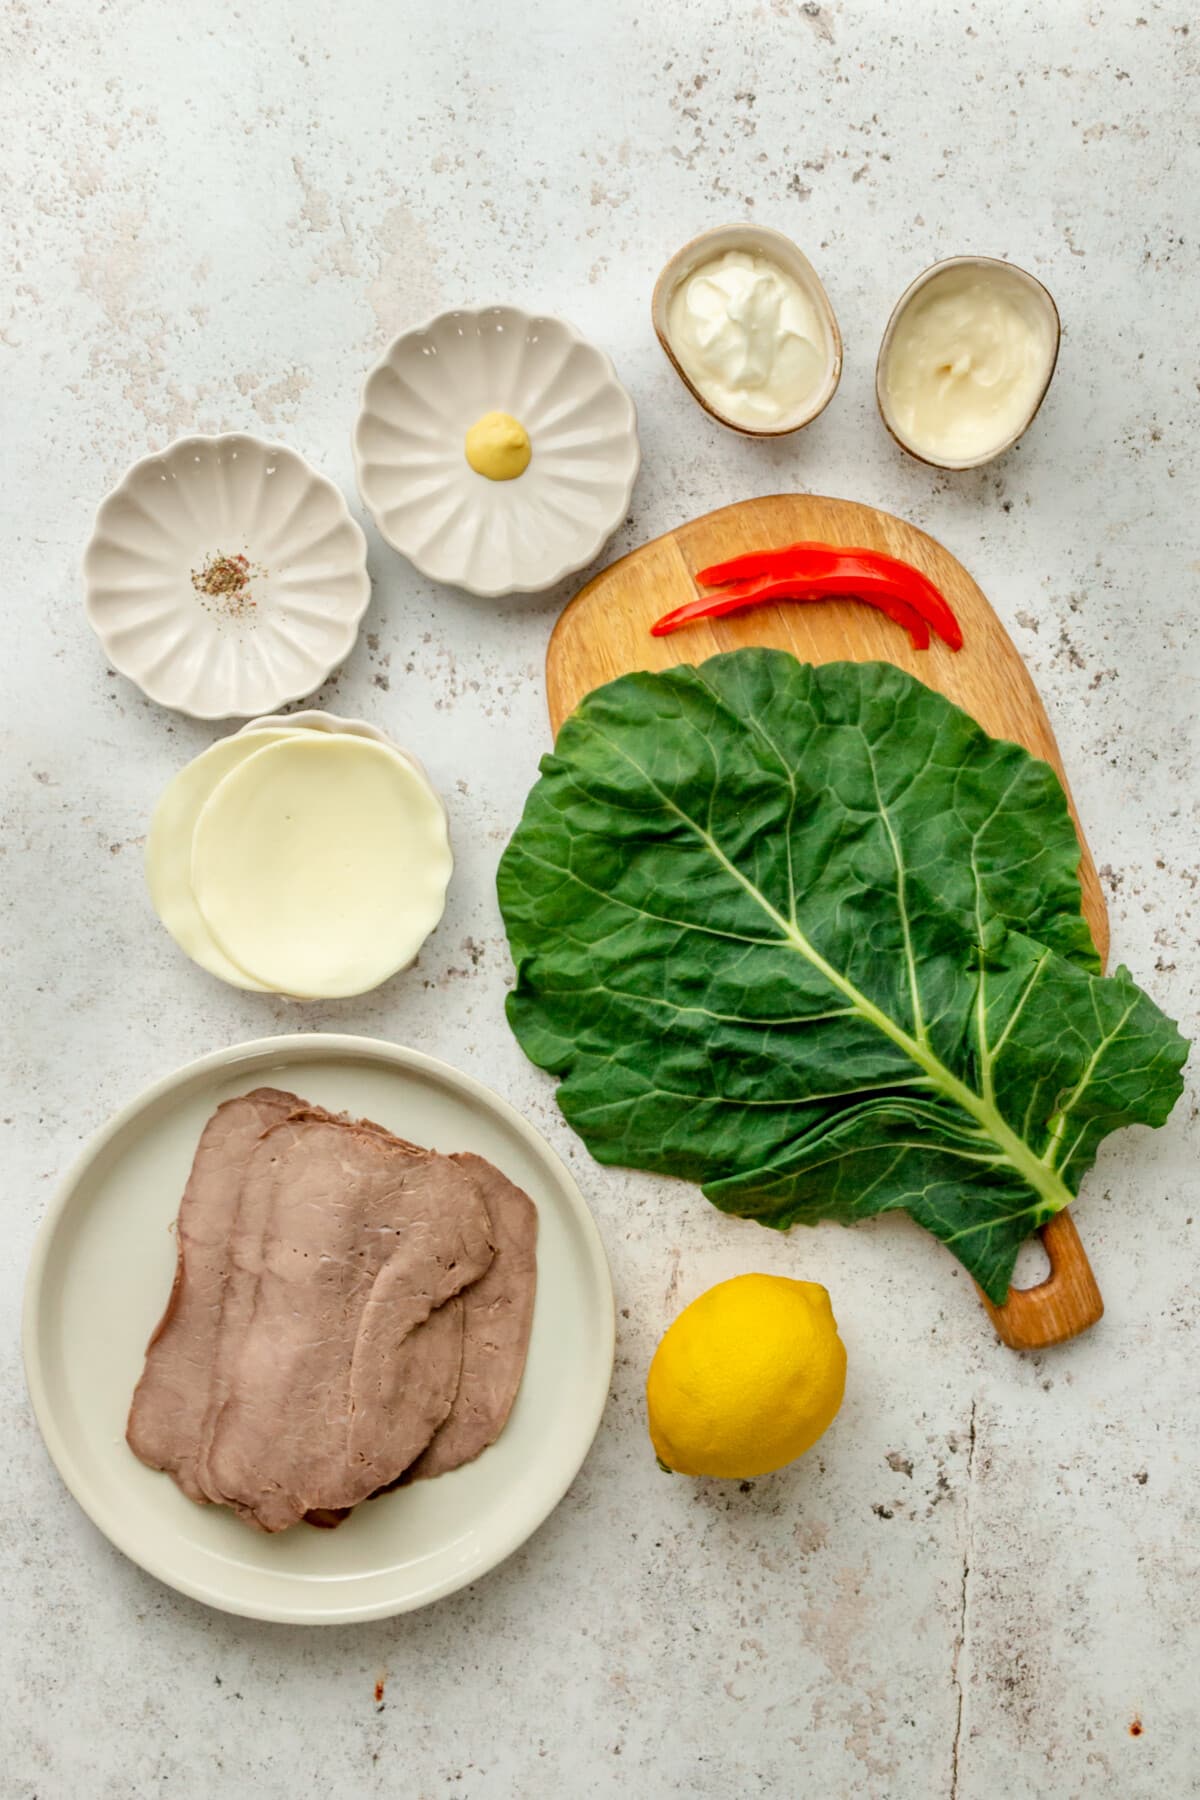 Ingredients for roast beef wraps with horseradish sauce sit in a variety of bowls and plates on a light grey surface.